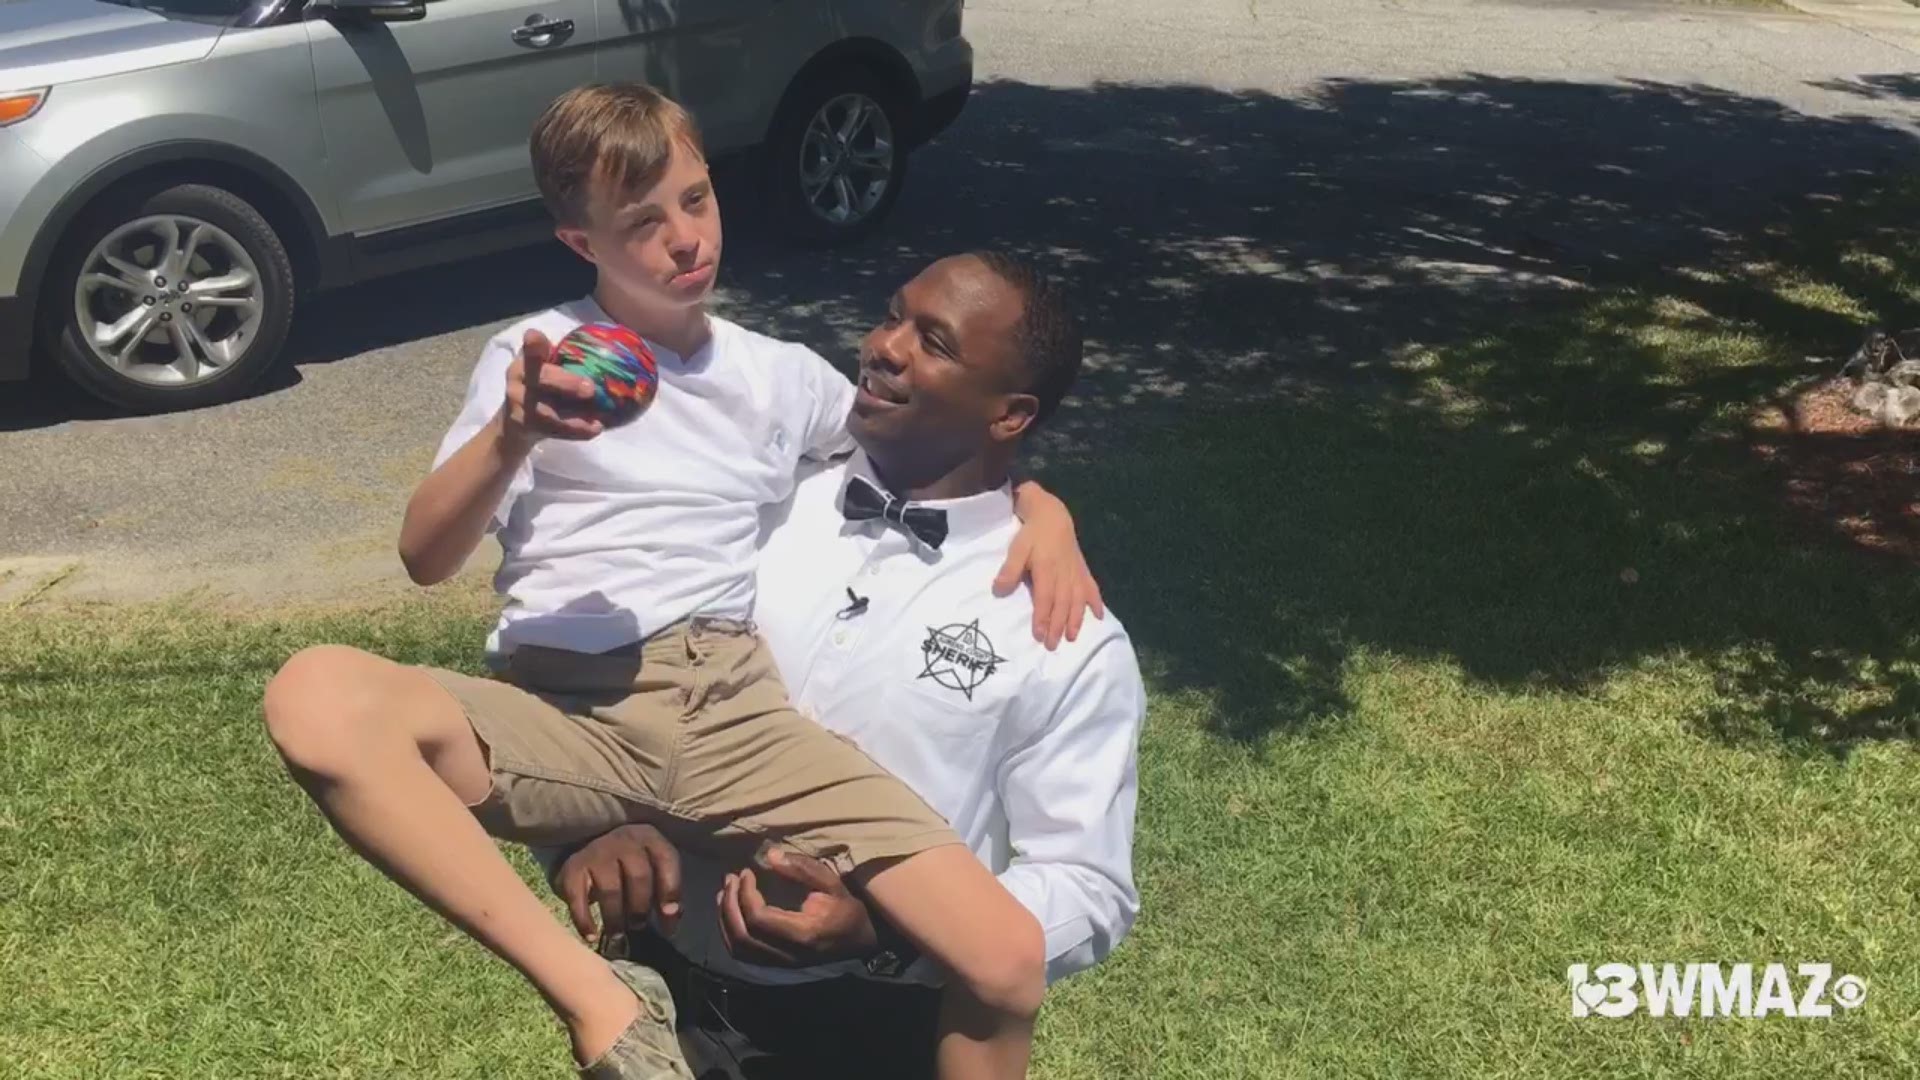 Demetrius Green, school resource officer at Northwest Laurens Elementary School, and fifth grader Carter Haskins have a unique bond. Green has decided to include Haskins in his wedding.